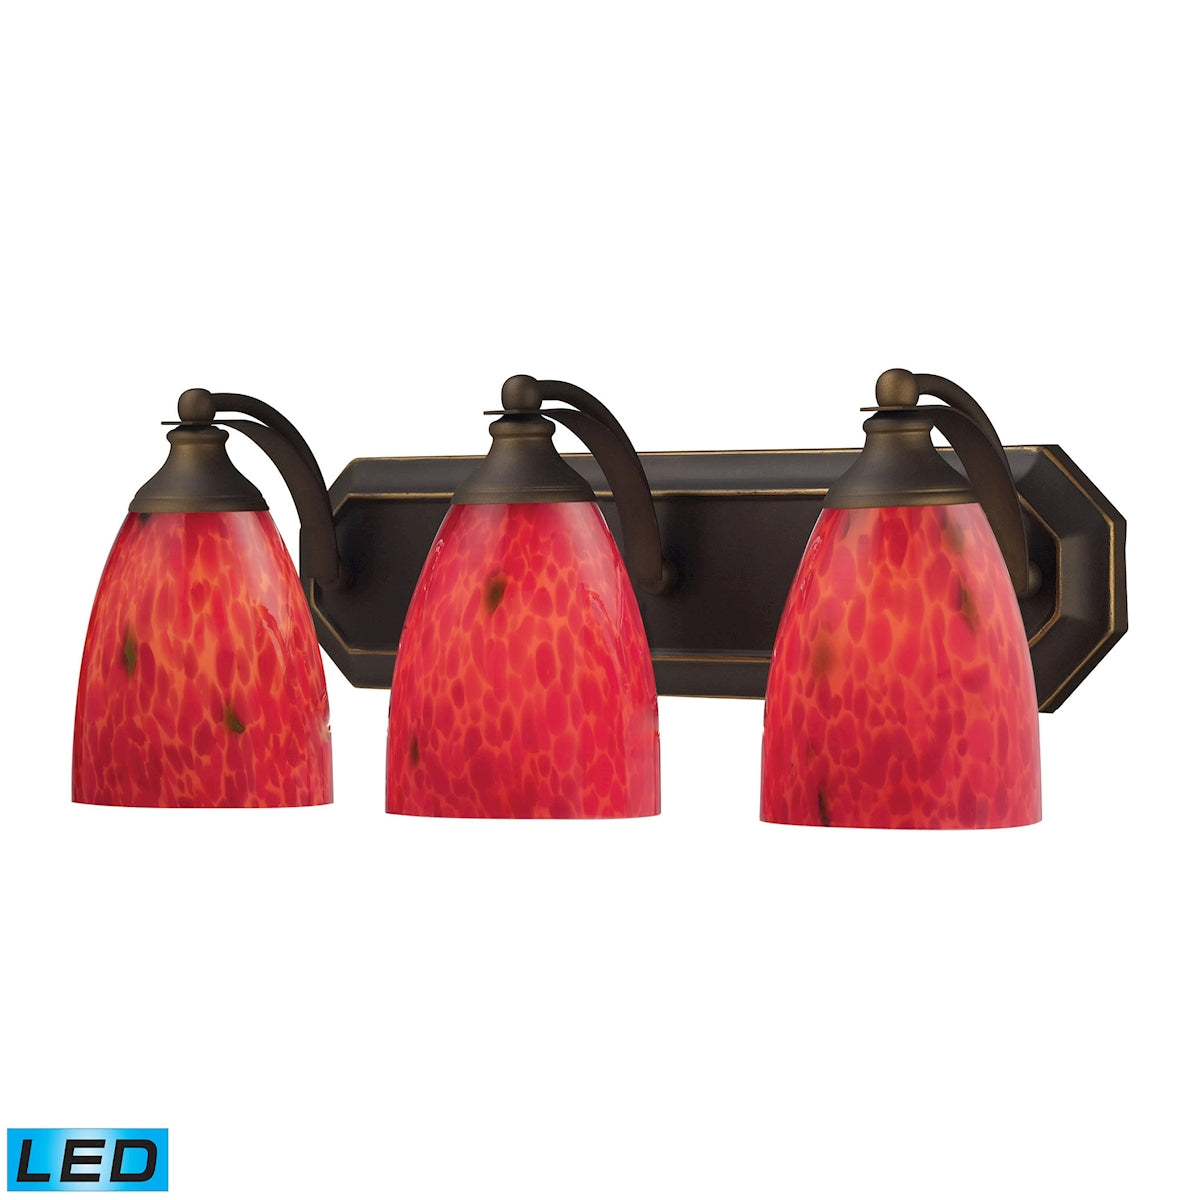 ELK Lighting 570-3B-FR-LED Mix-N-Match Vanity 3-Light Wall Lamp in Aged Bronze with Fire Red Glass - Includes LED Bulbs